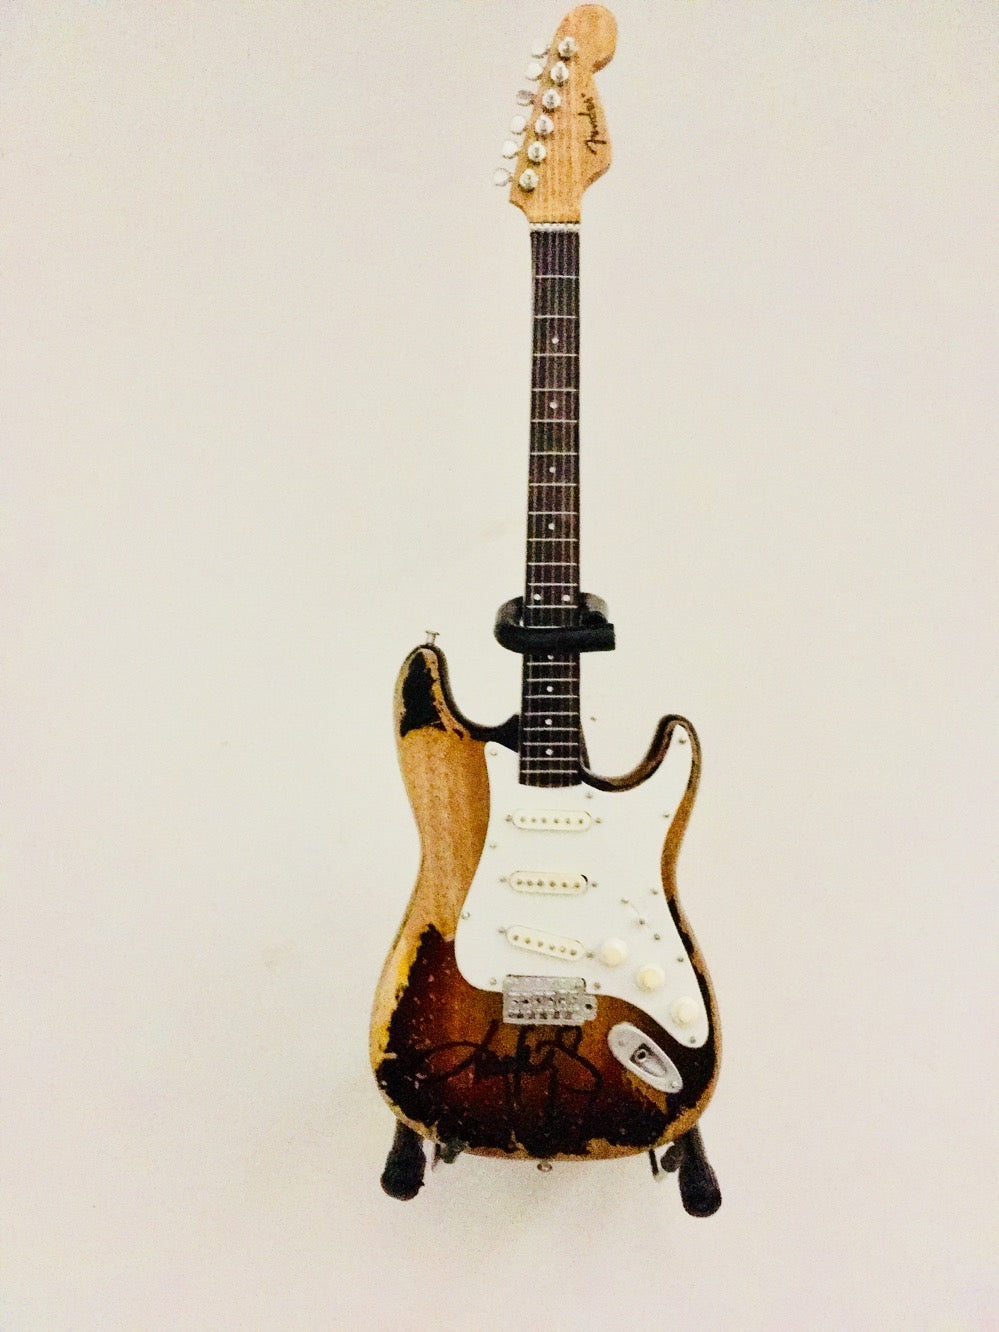 Autographed Miniature Replica of Kenny's Iconic '61 Fender Stratocaster